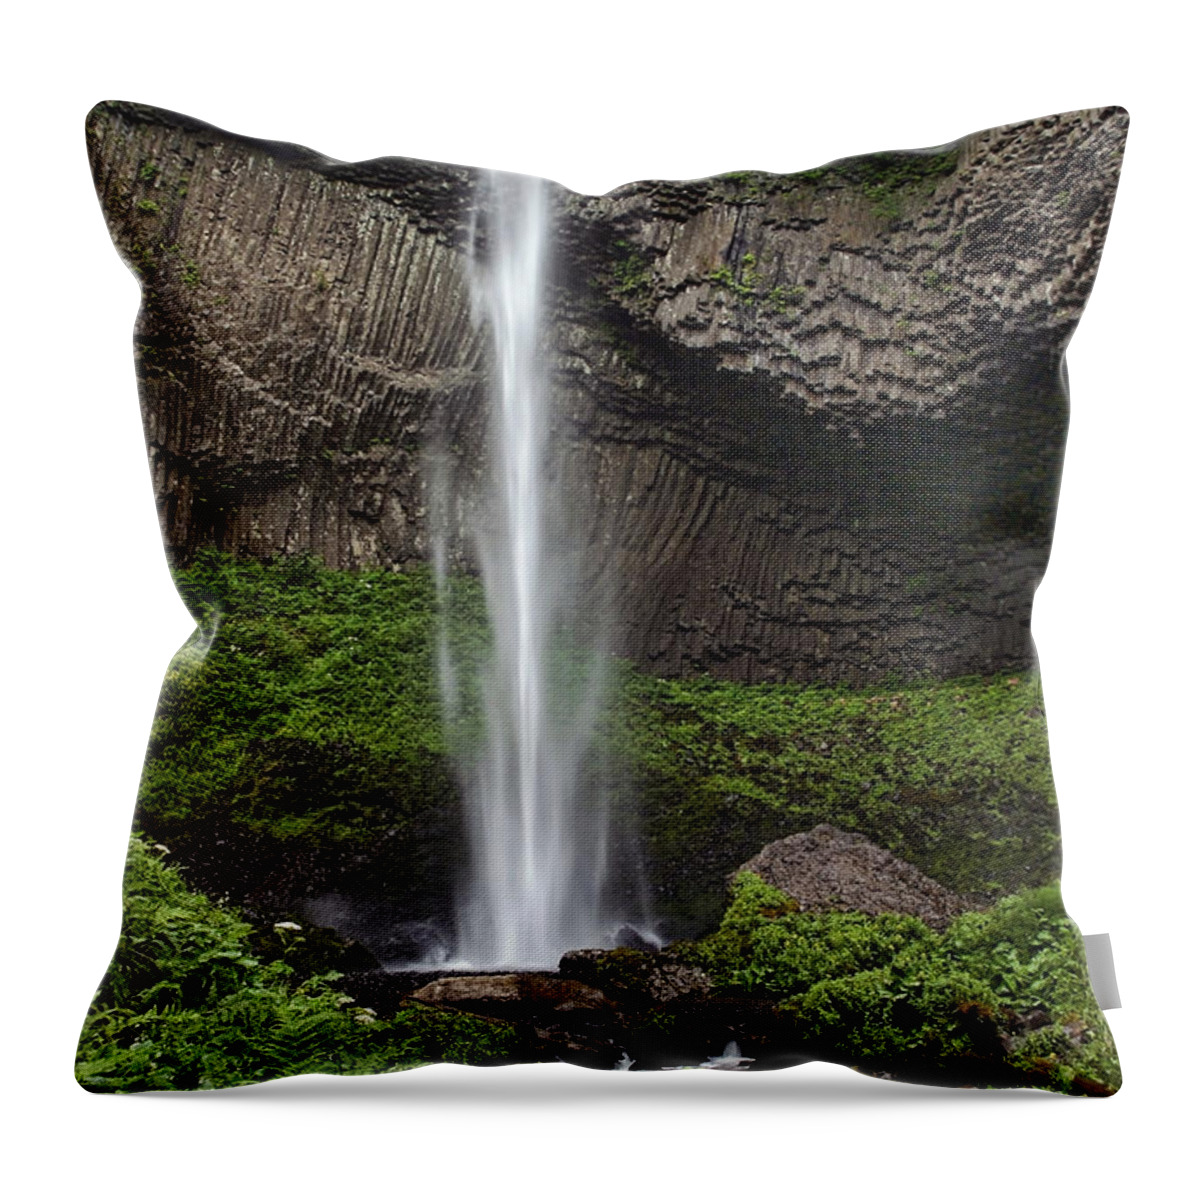 Latourelle Falls Throw Pillow featuring the photograph Latourelle Falls by Wes and Dotty Weber